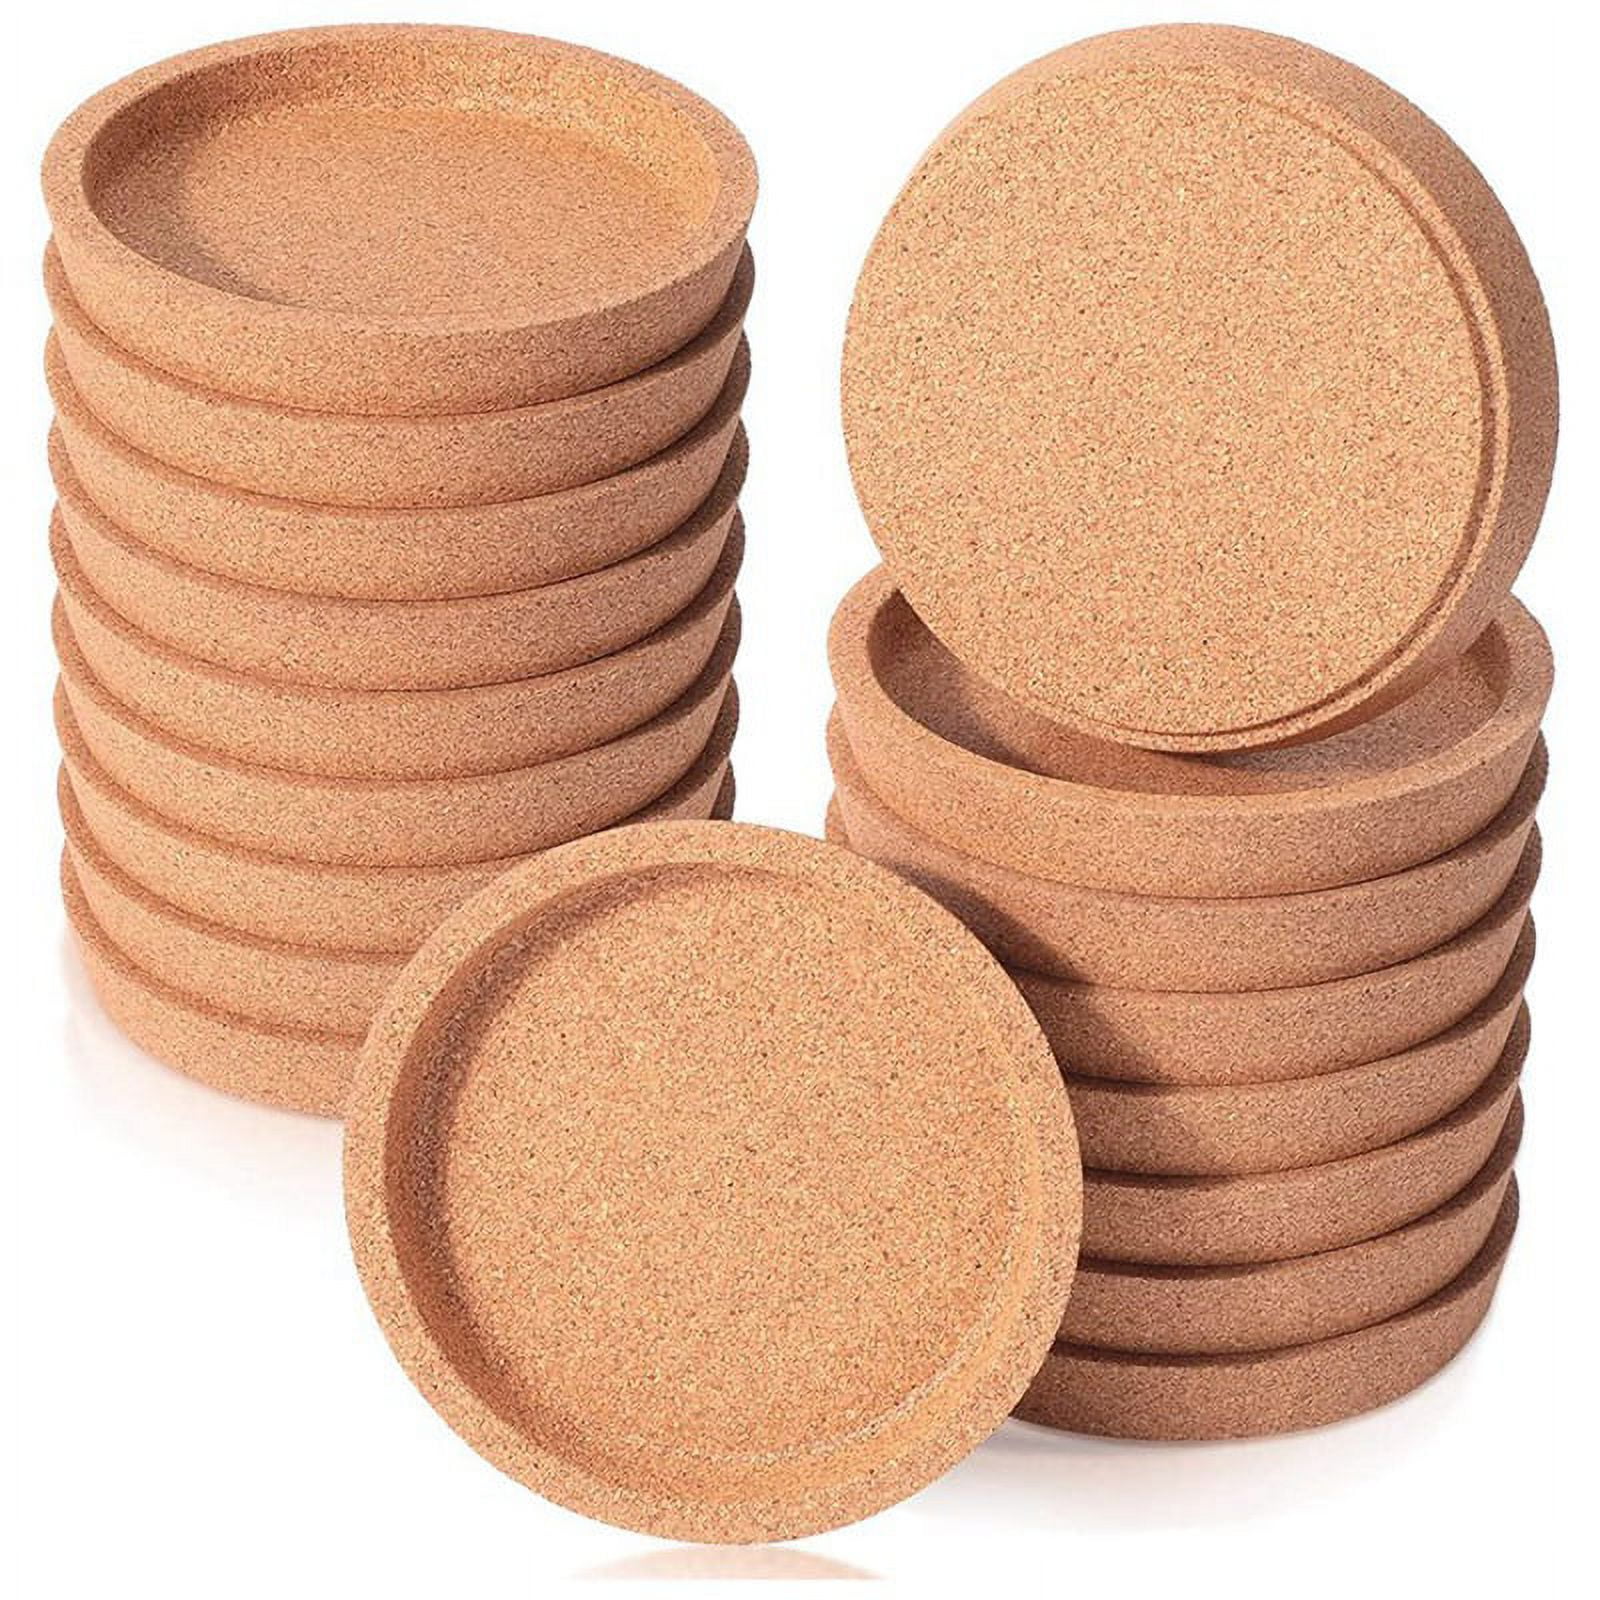 18 Cork Coasters Bulk 4 Inch Round Lip Cup Holder Leak Proof Cork Coasters  for Drinks Reusable Absorbent Cup Coaster